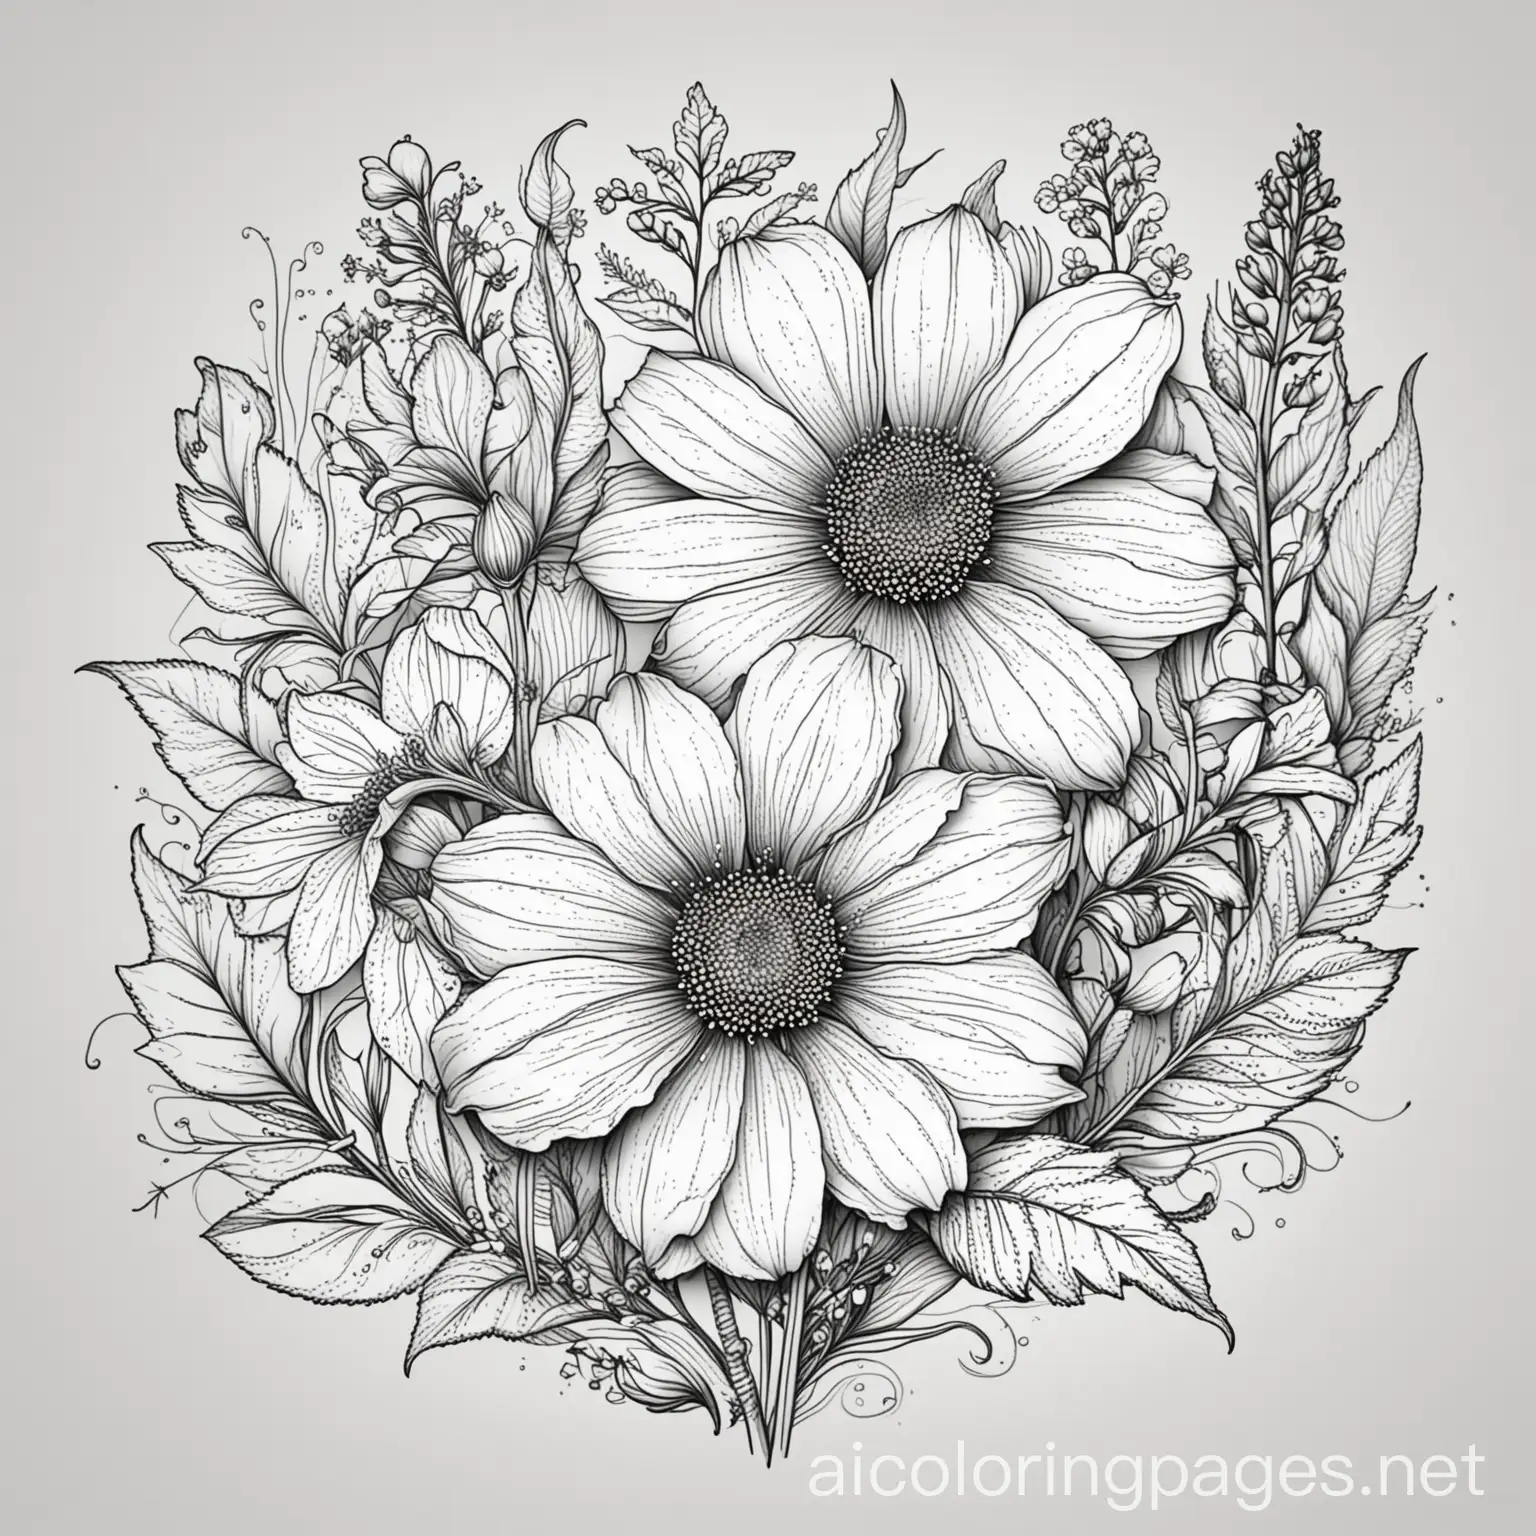 decorative and detailed flowers for colouring in, black and white, thick lines, Coloring Page, black and white, line art, white background, Simplicity, Ample White Space